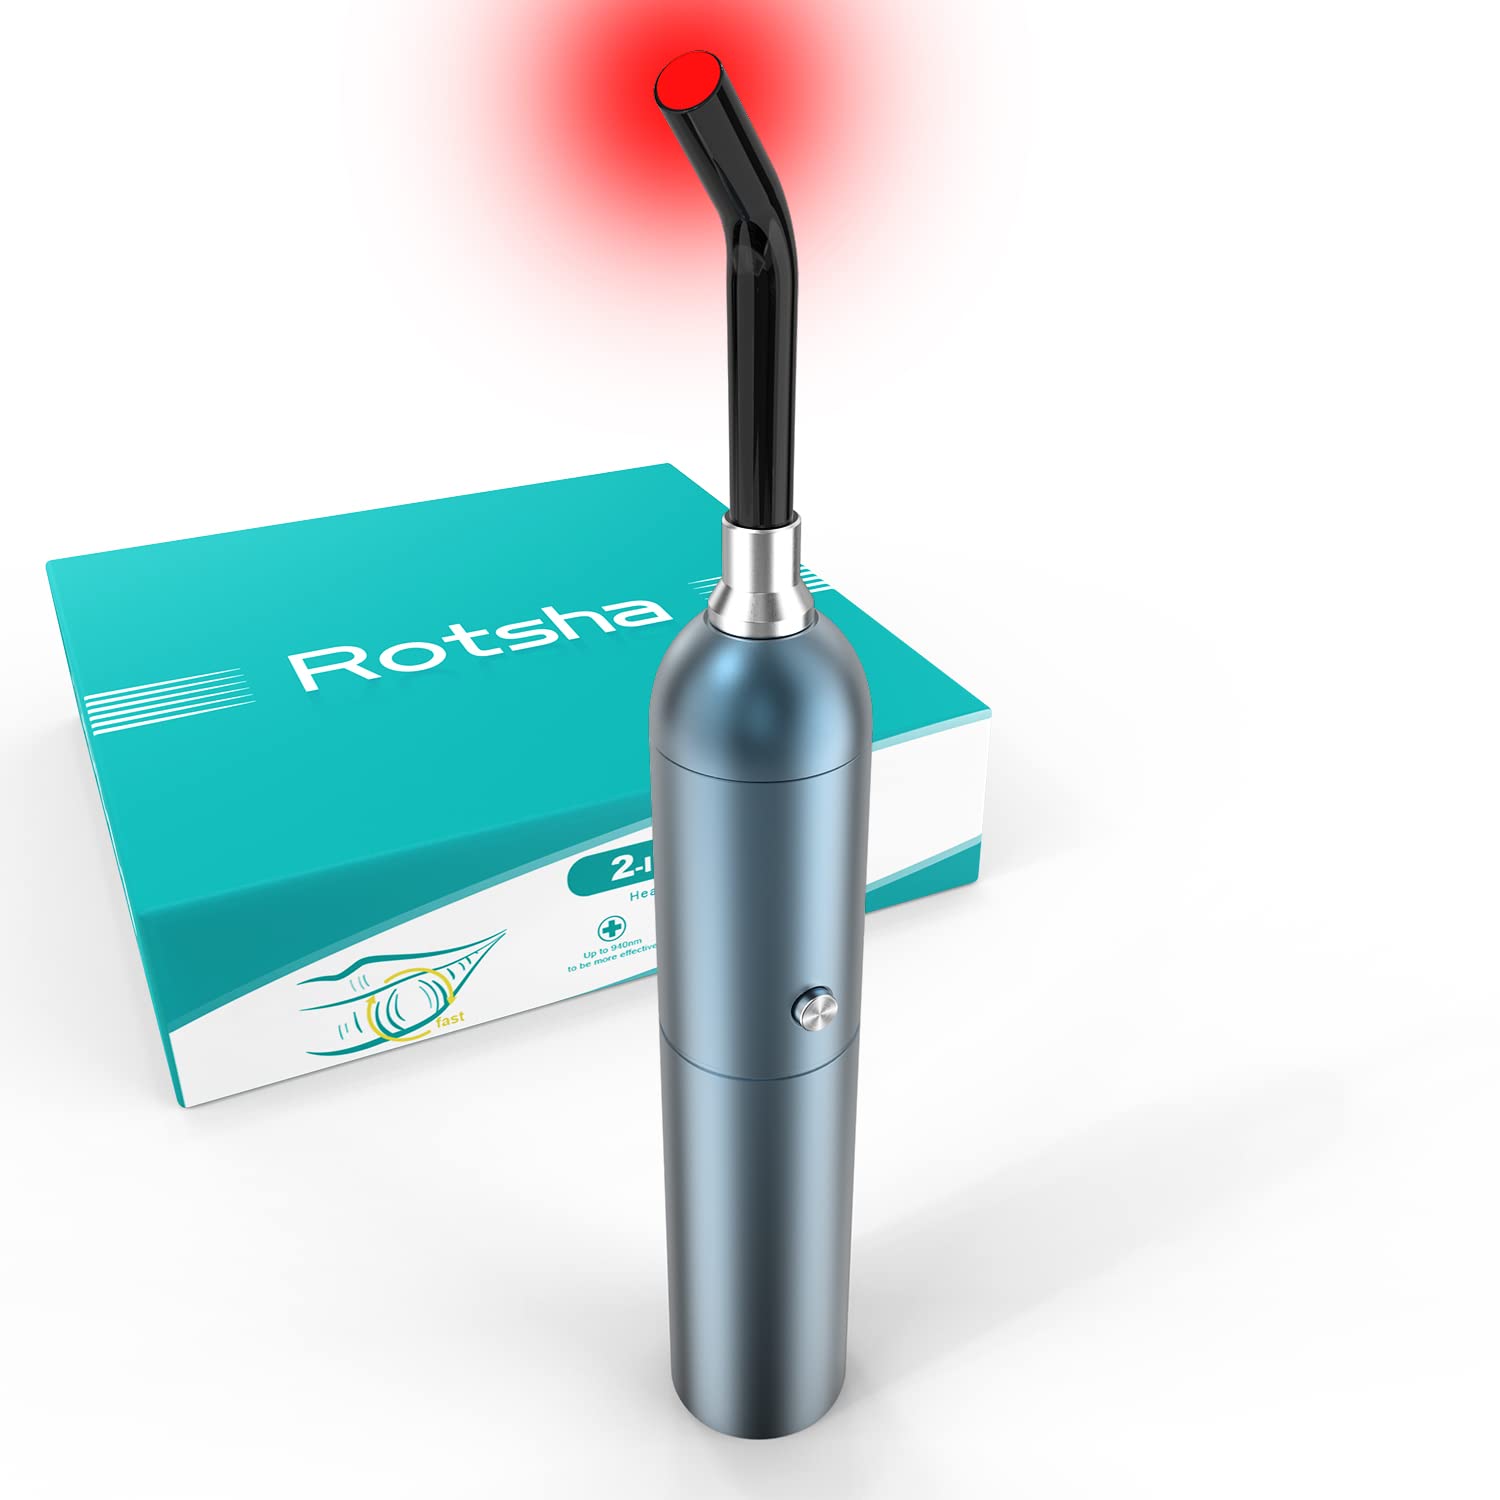 Rotsha Red Light Therapy Device, NRedT-03, Sold Out!